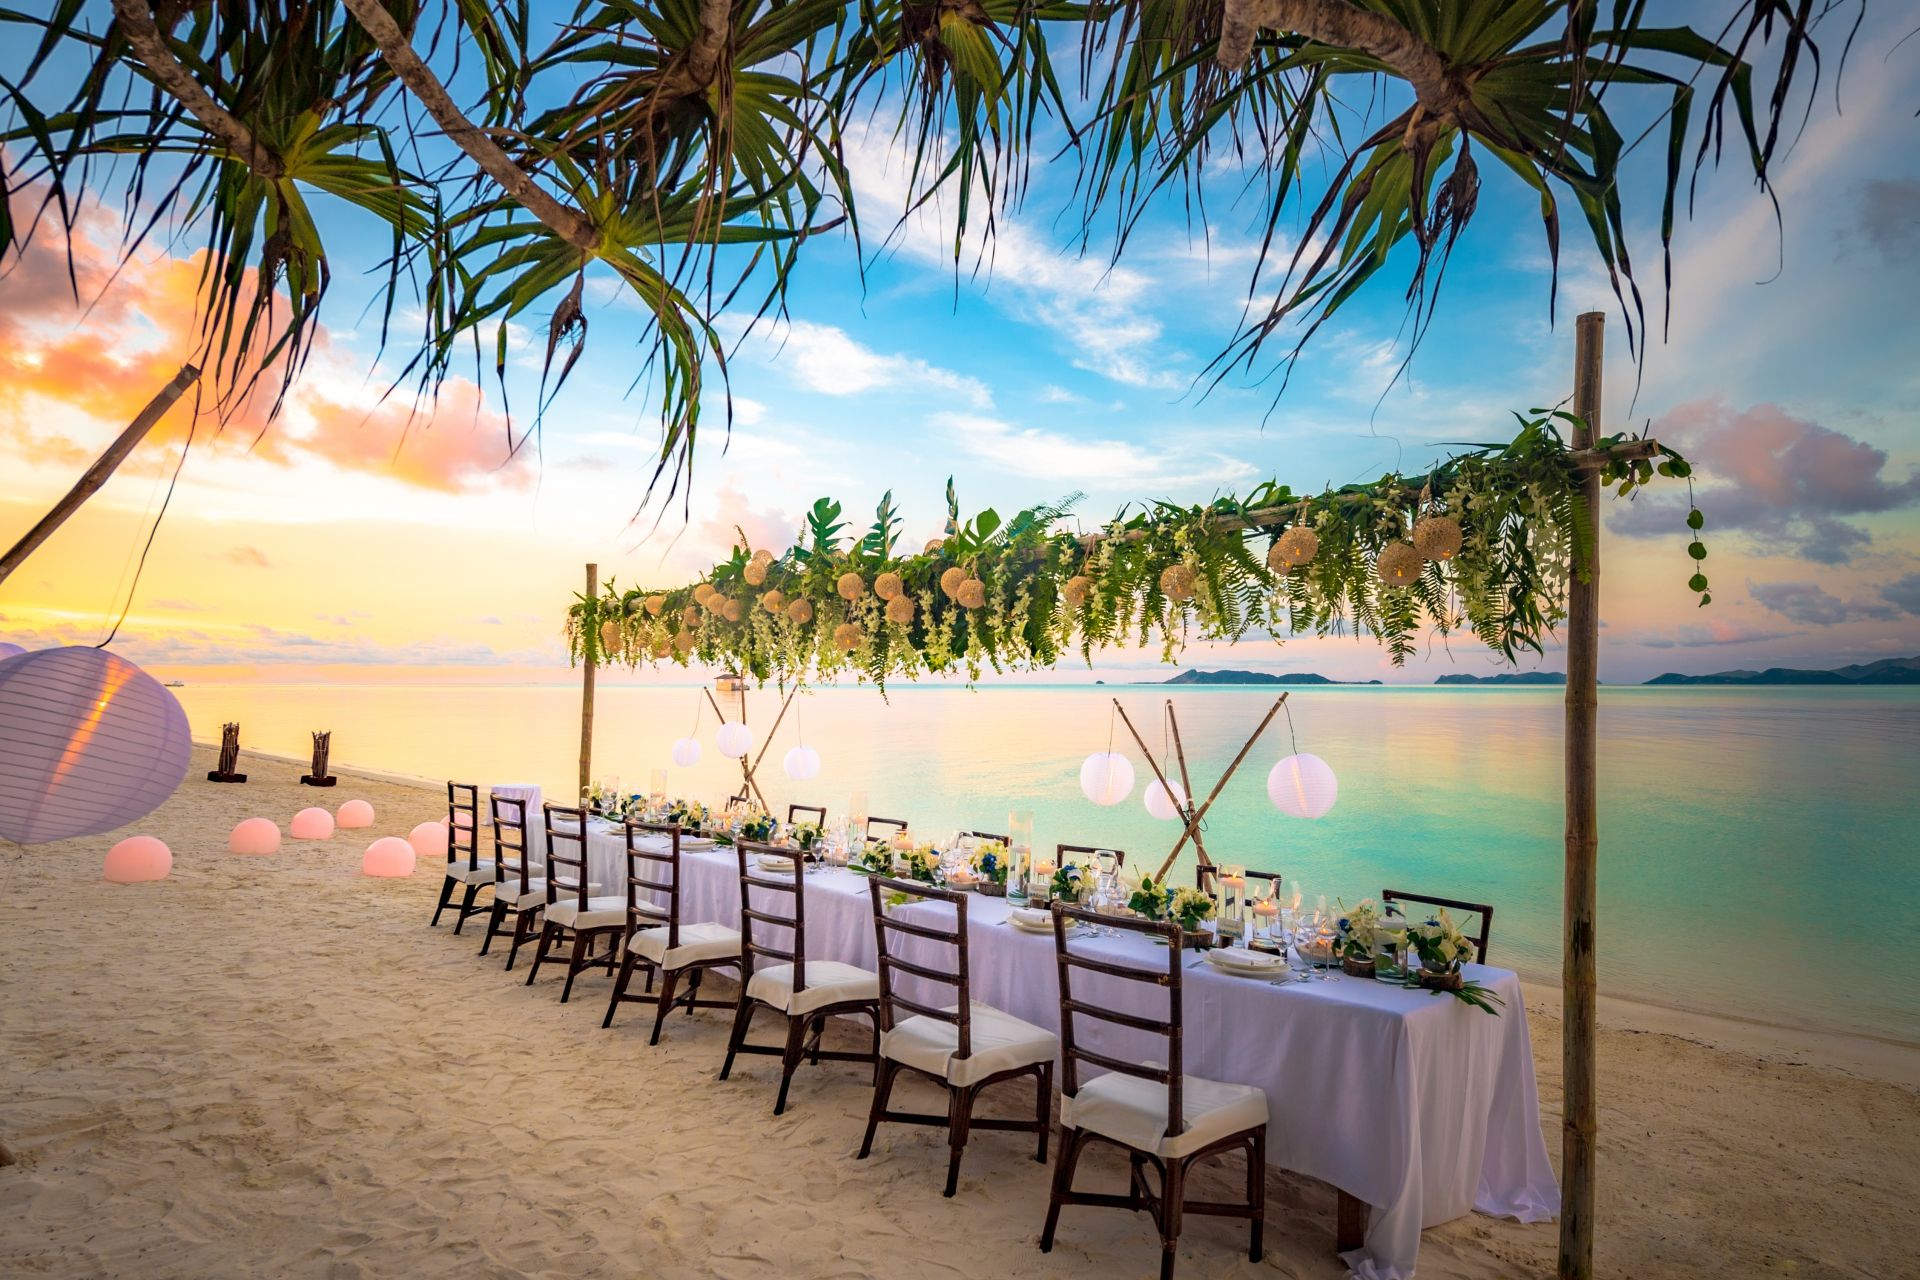 6 Tips for Choosing the Perfect Destination Wedding Venue in the Philippines 2023